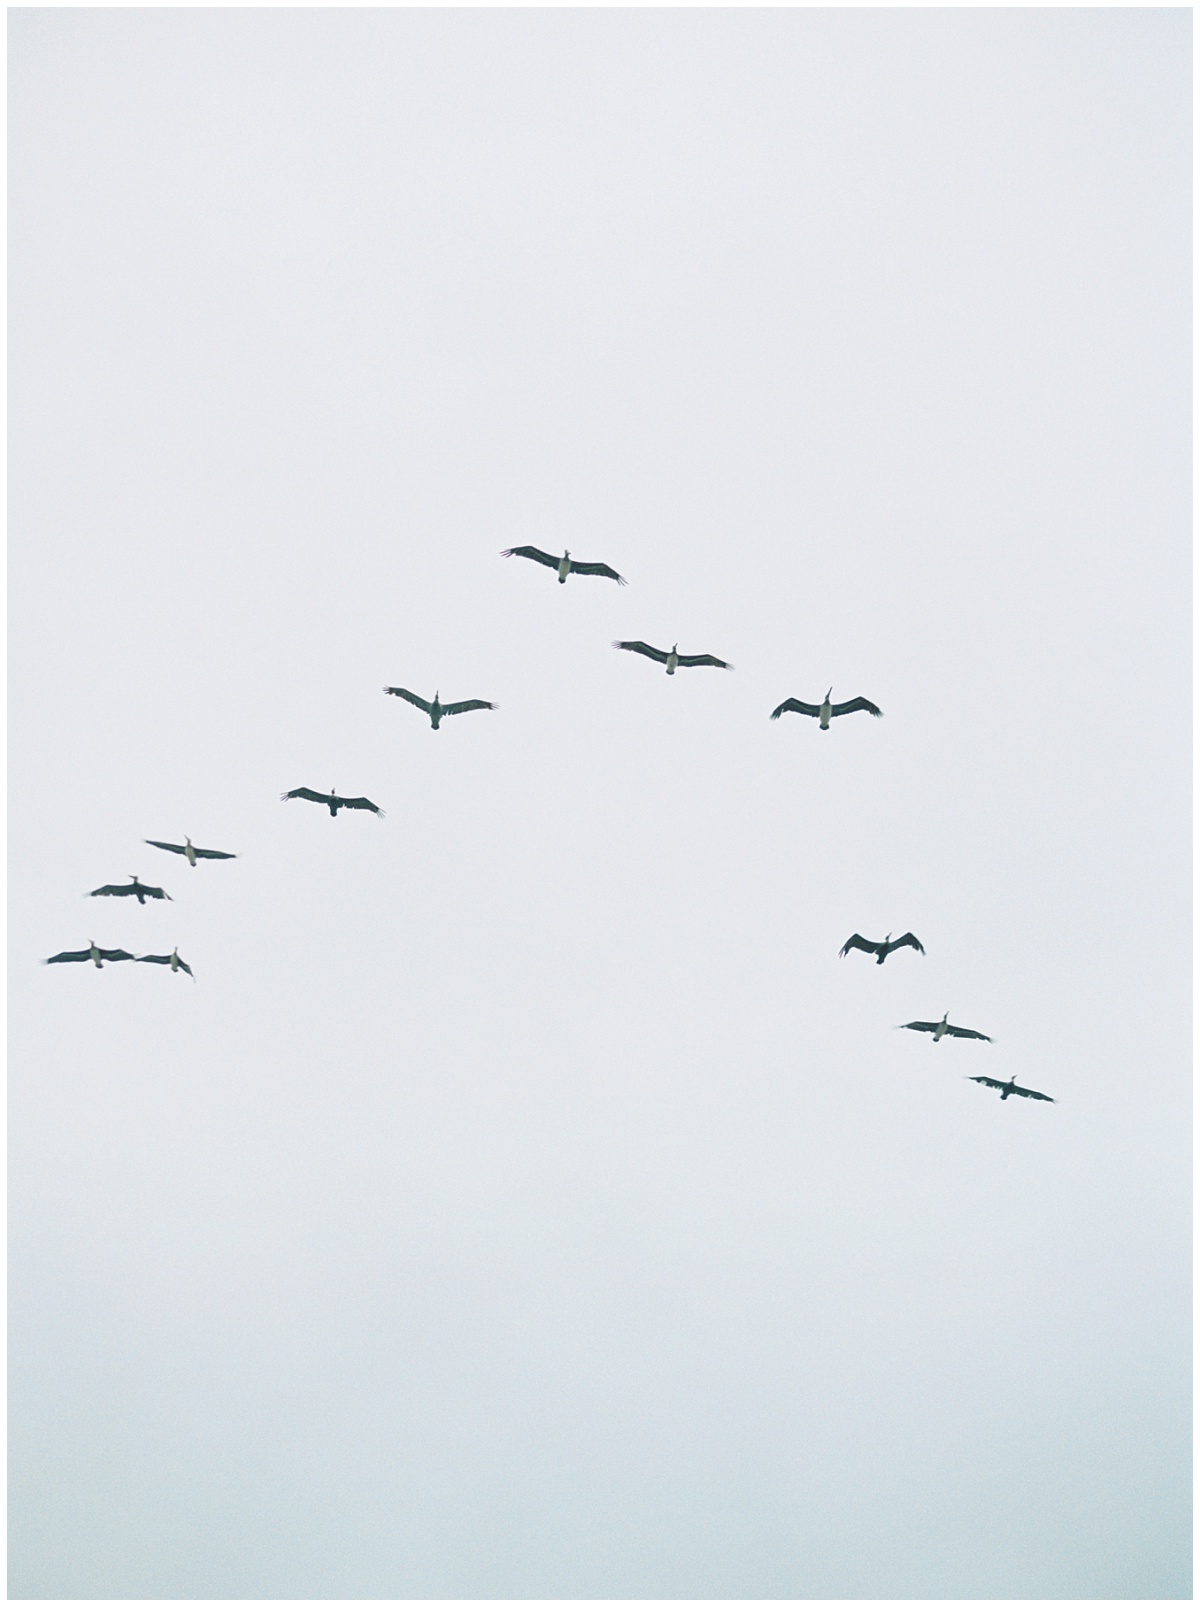 Seagulls in a row flying across the overcast sky in Pacific Grove on Film Portra 800